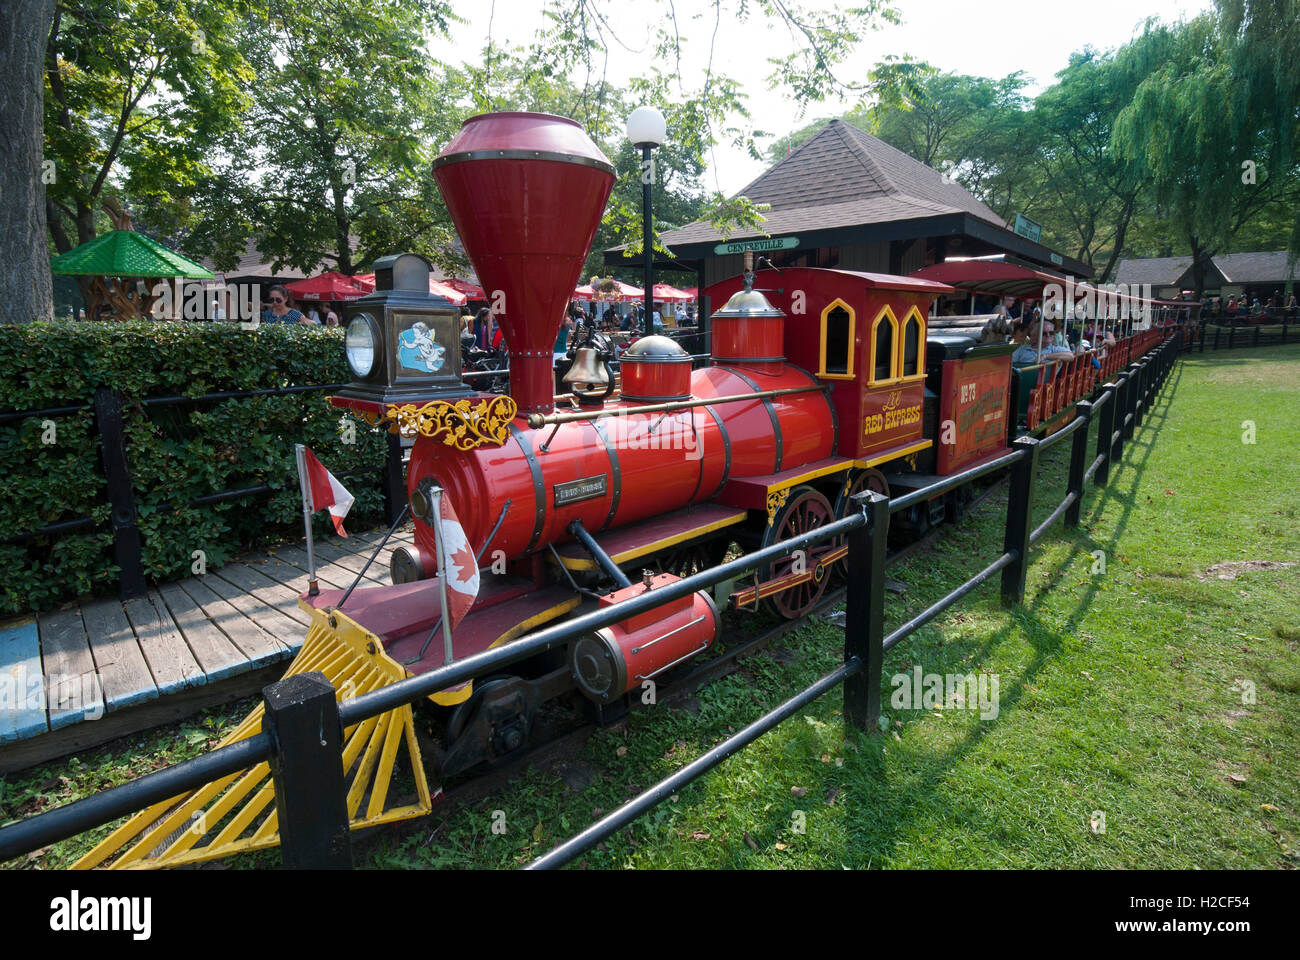 The well-known Centreville miniature train ride at Centreville amusement park on the Toronto Island park. Toronto Ontario Canada Stock Photo